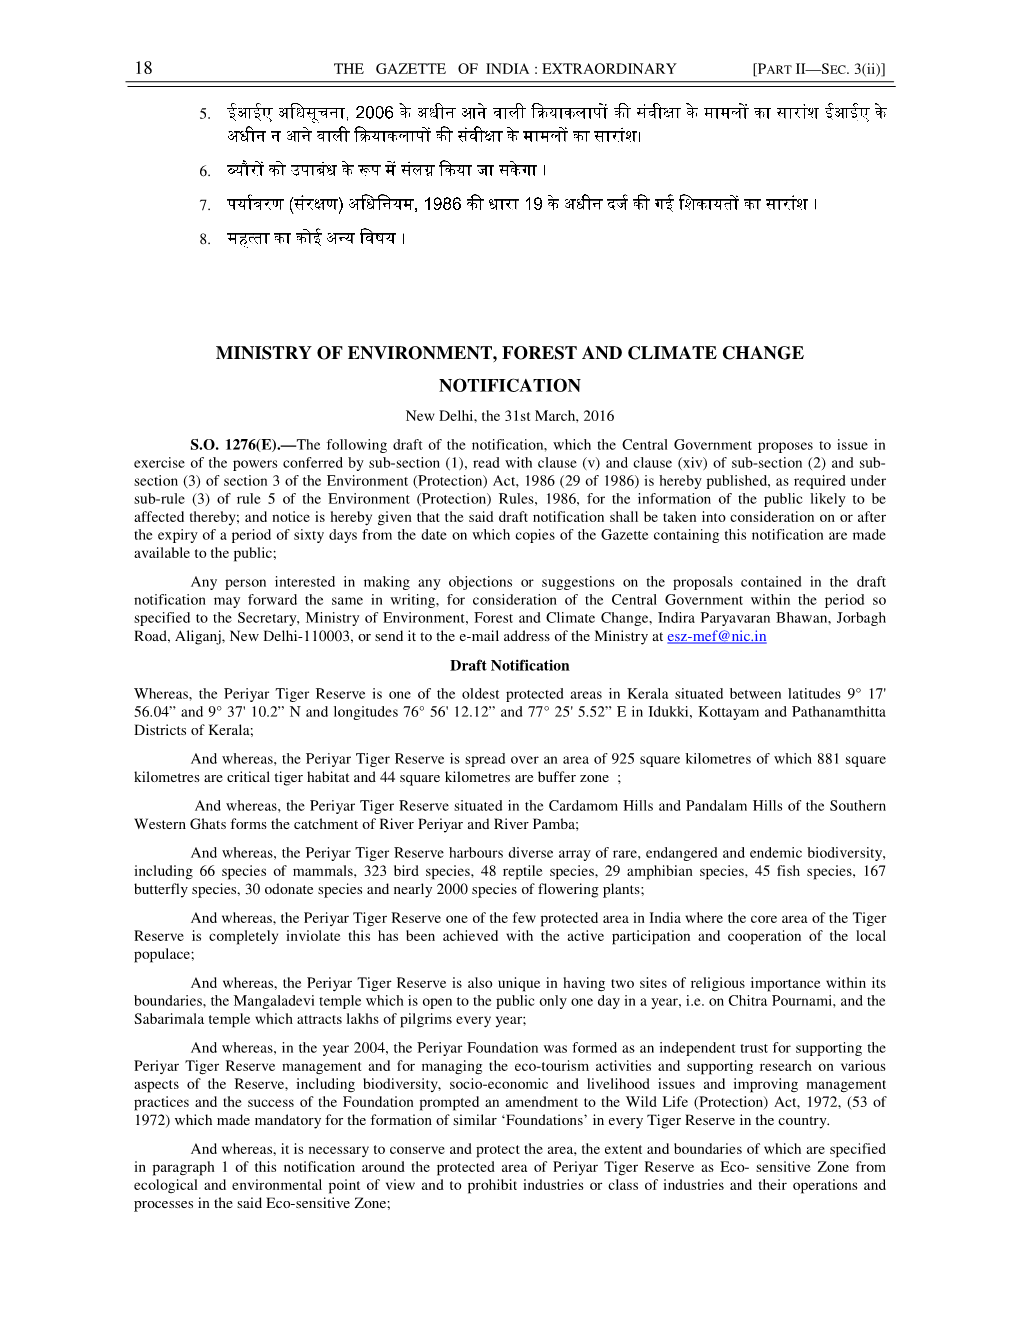 18 Ministry of Environment, Forest and Climate Change Notification